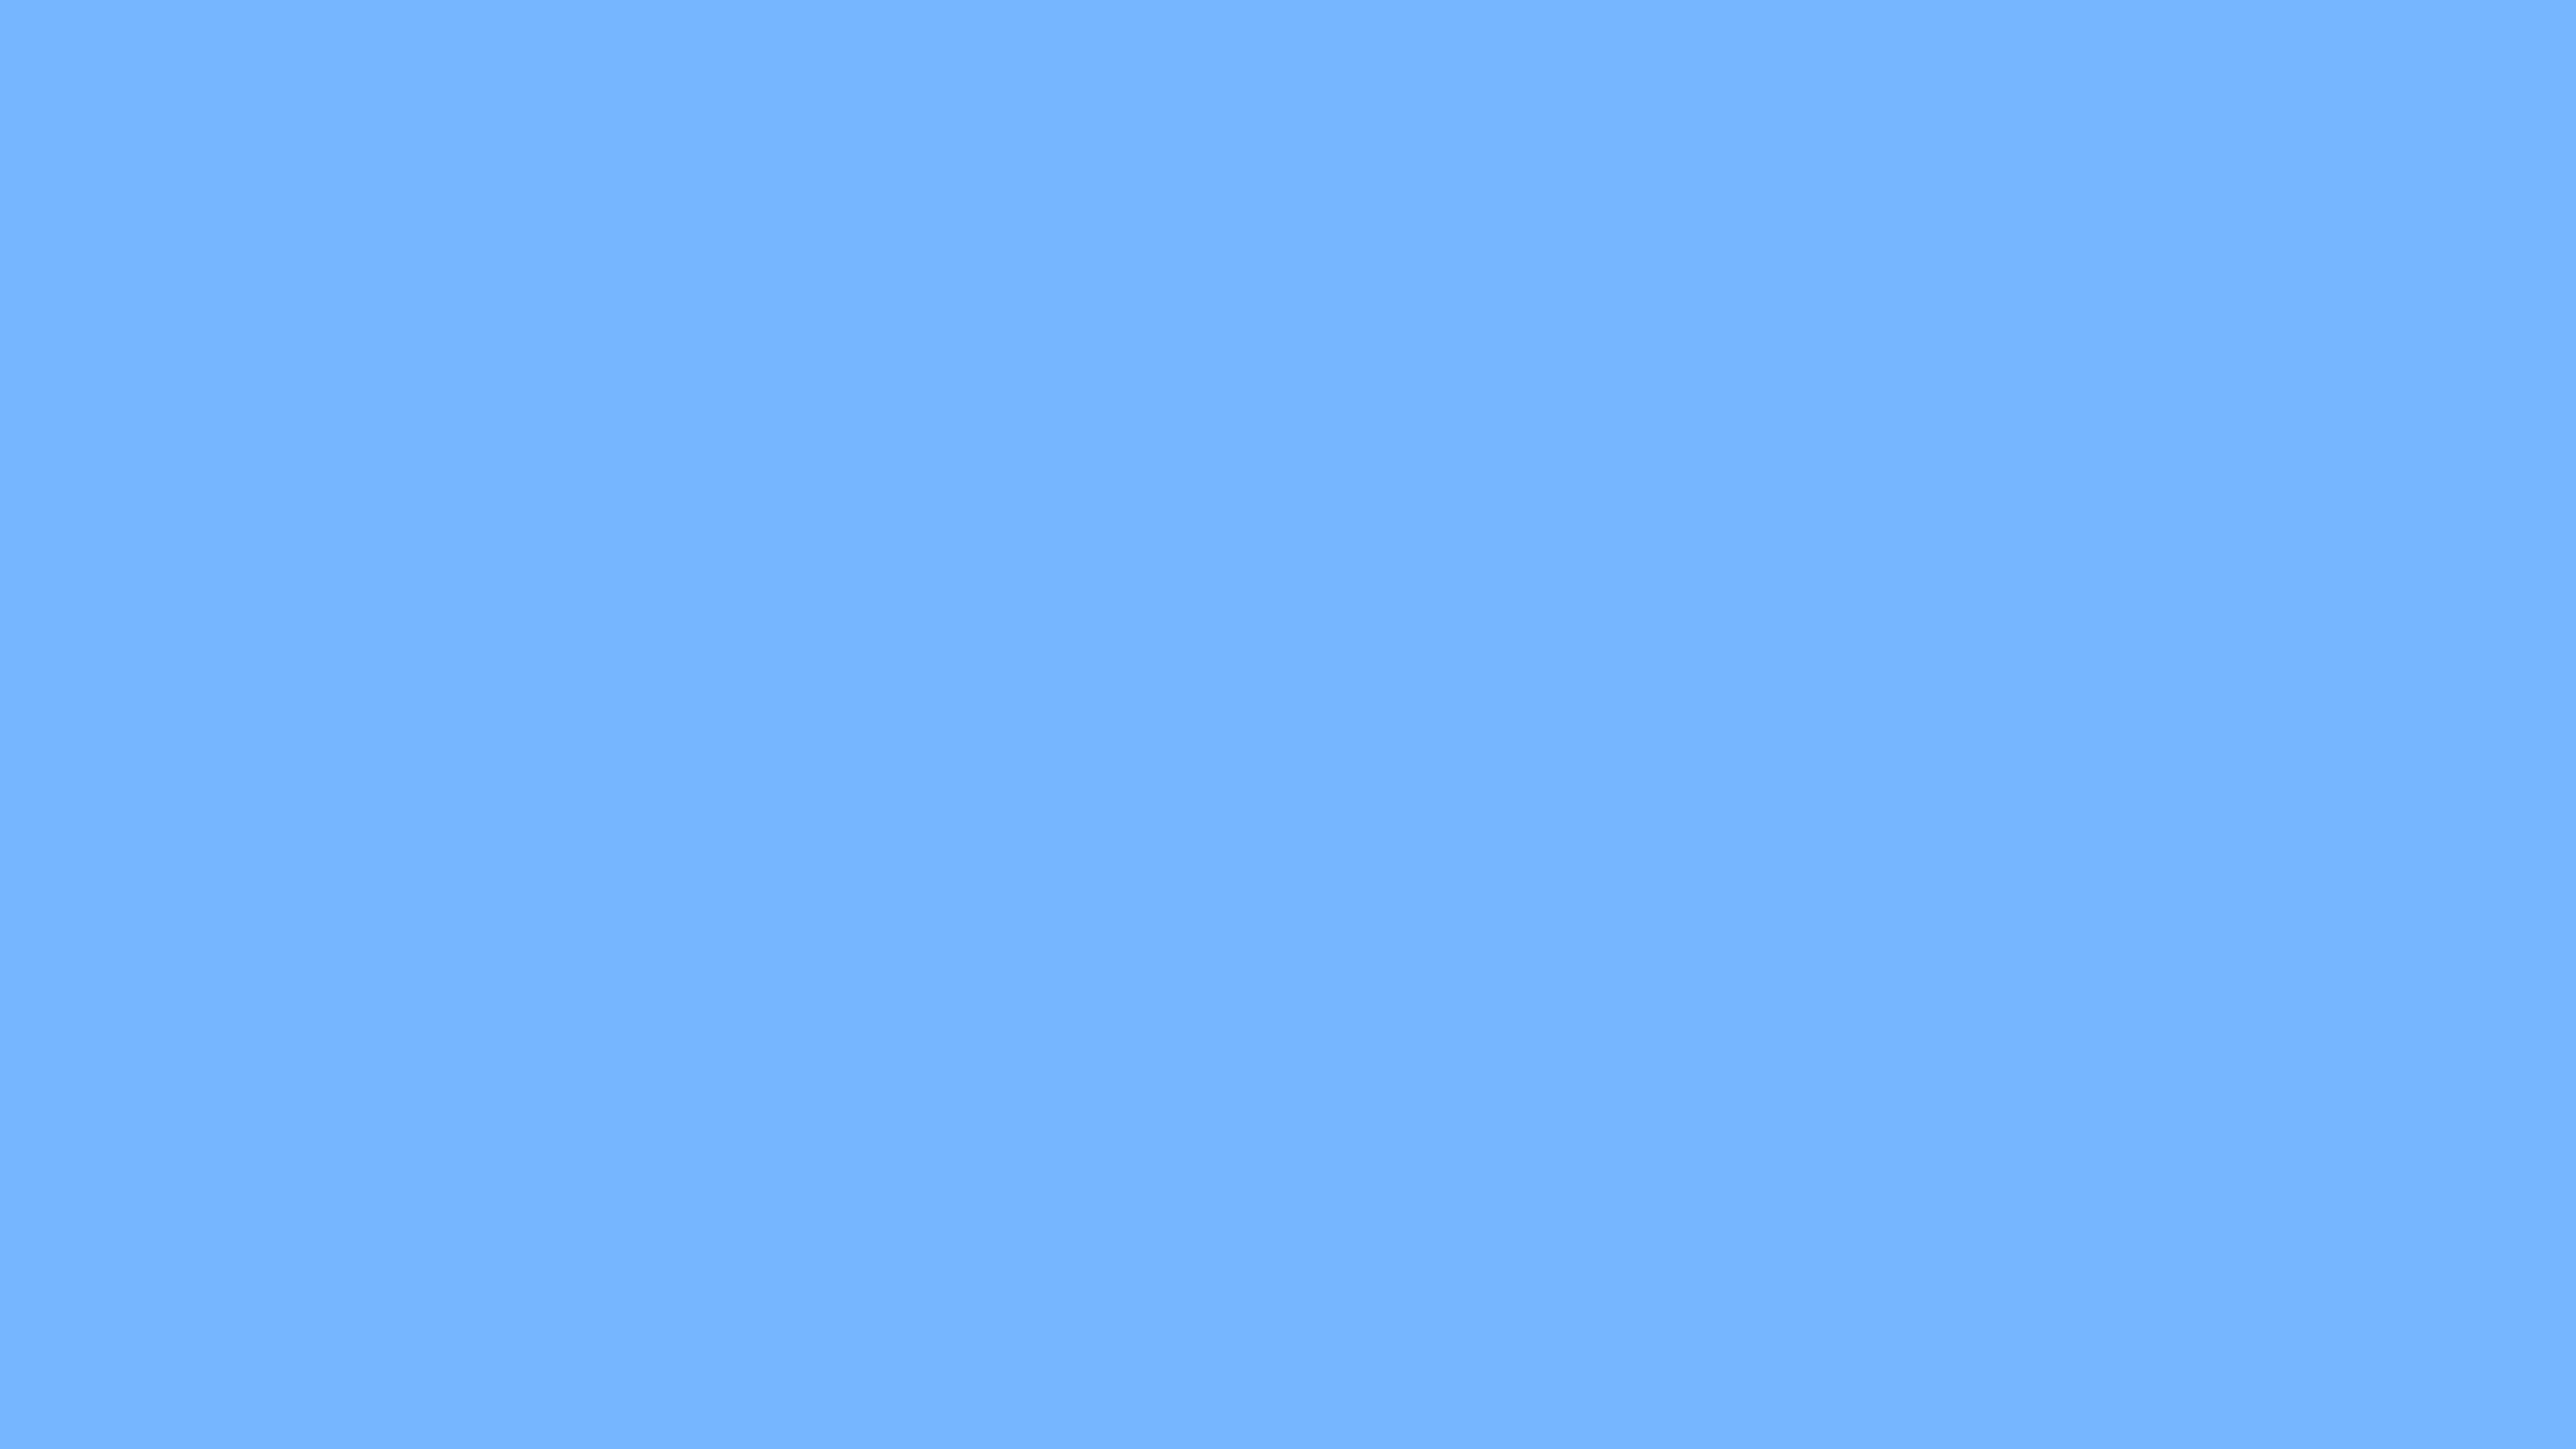 7680x4320 French Sky Blue Solid Color Background